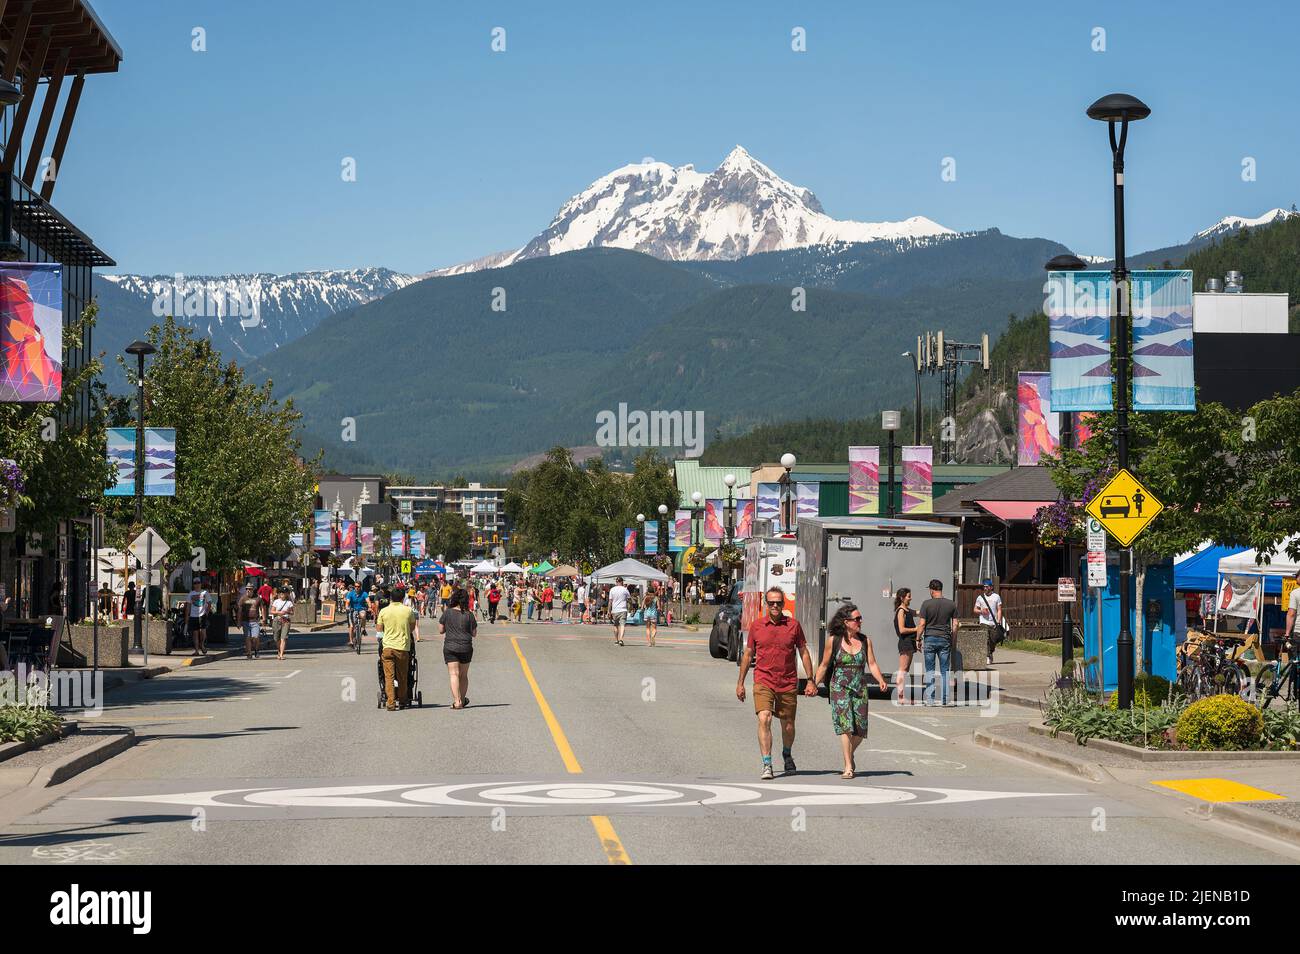 Downtown Squamish BC with Cleveland Avenue closed off for a street market. Stock Photo